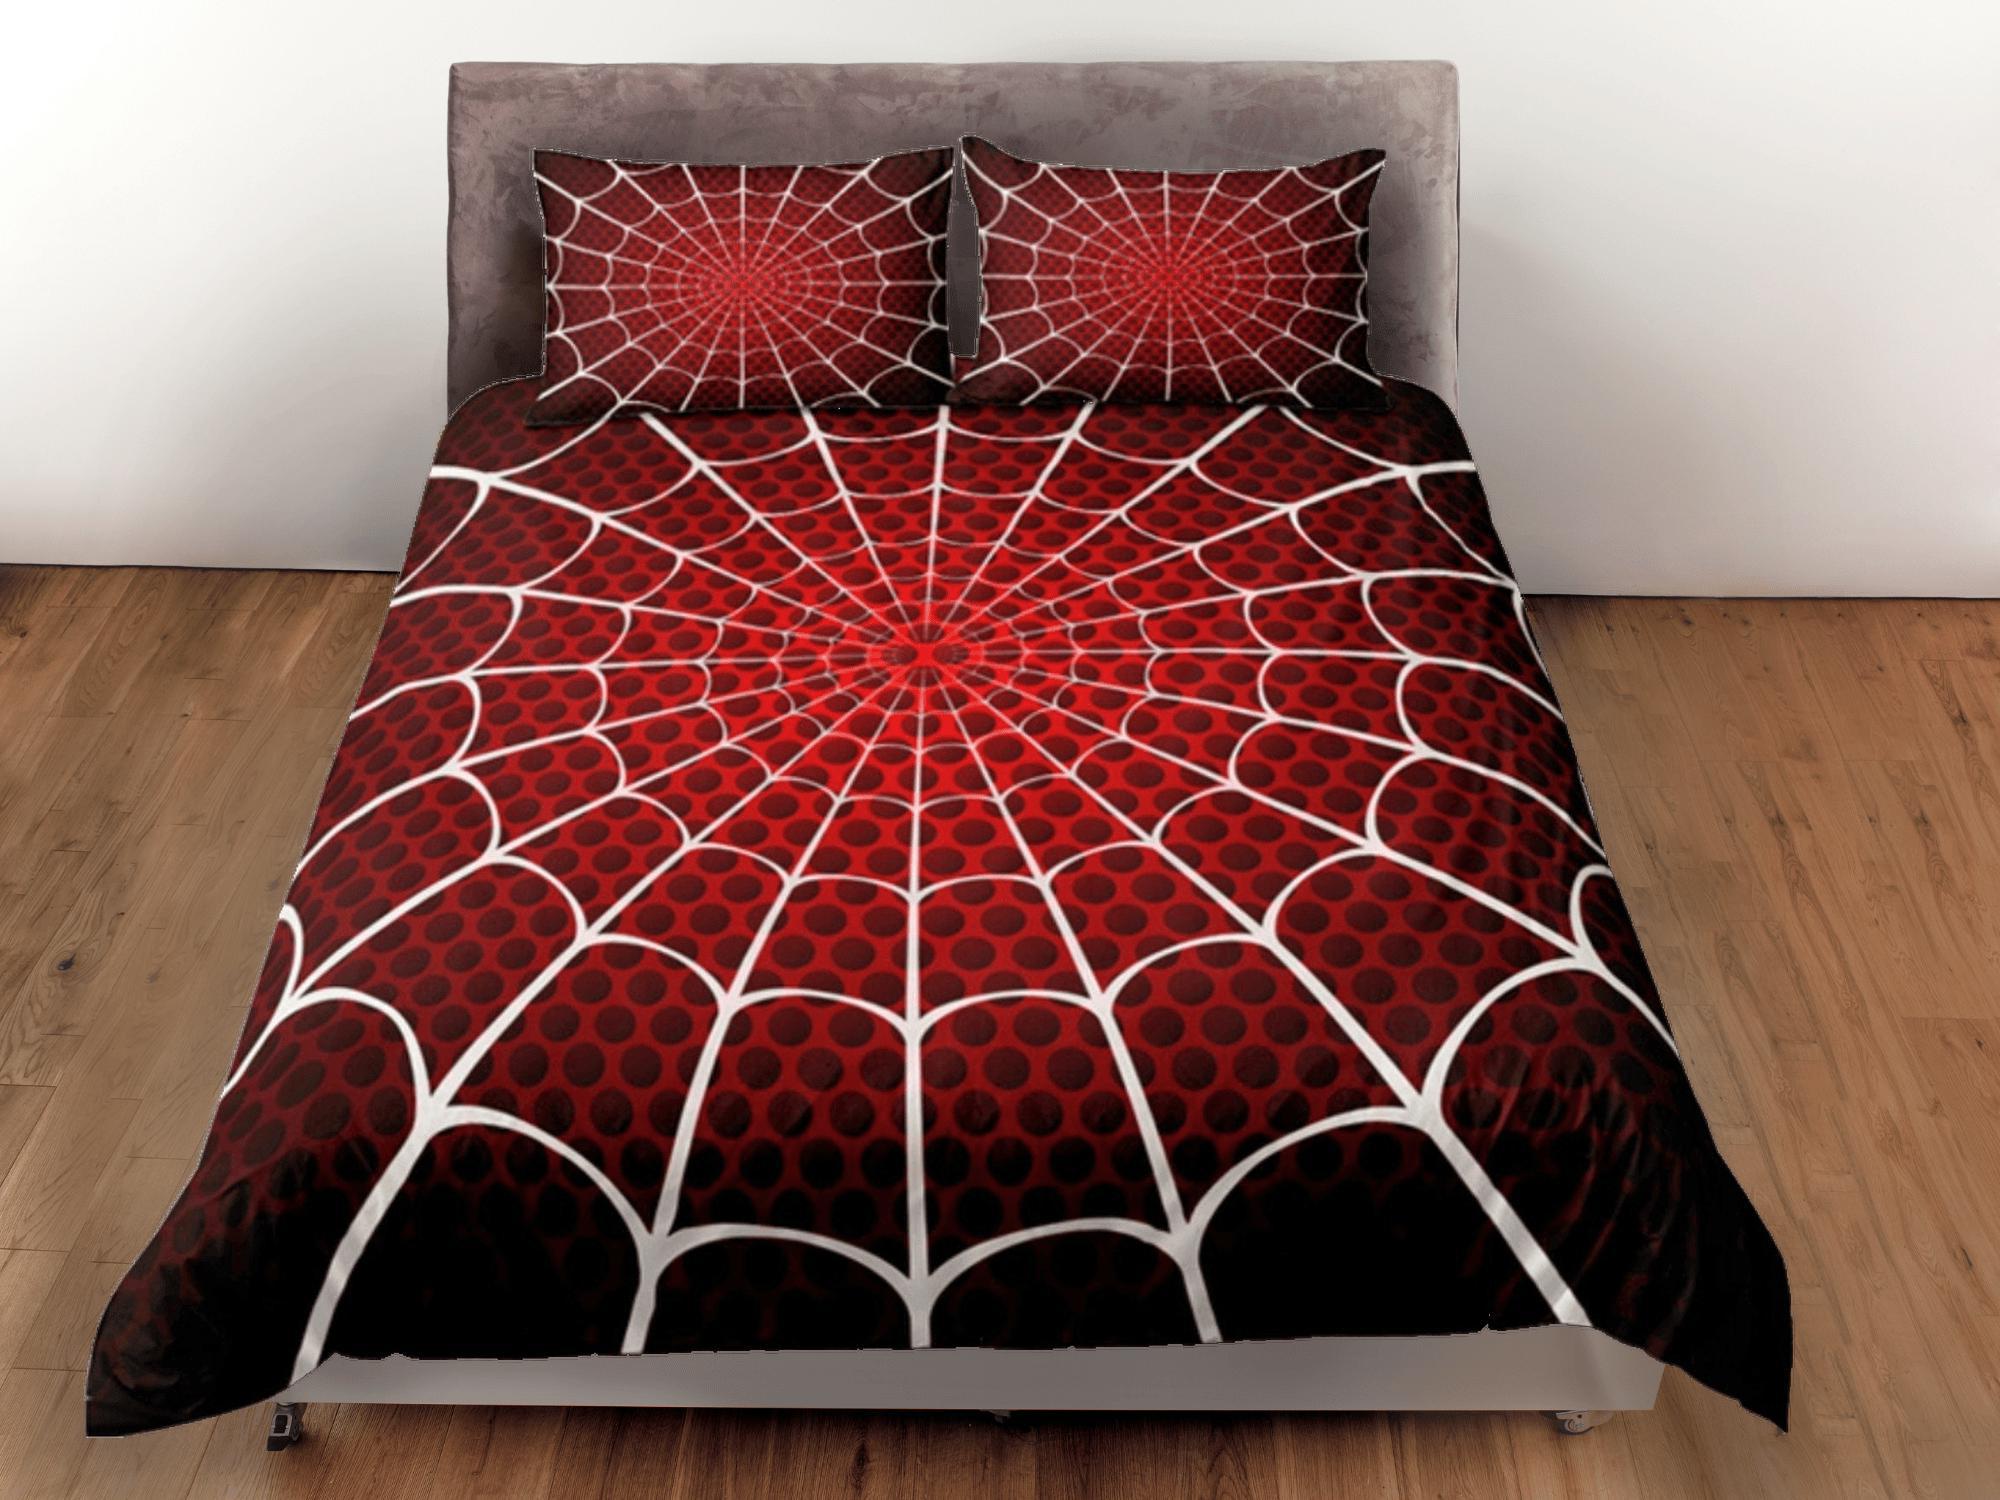 daintyduvet Spider Web Red Duvet Cover Set Bedspread, Teen Kids Bedding with Pillowcase